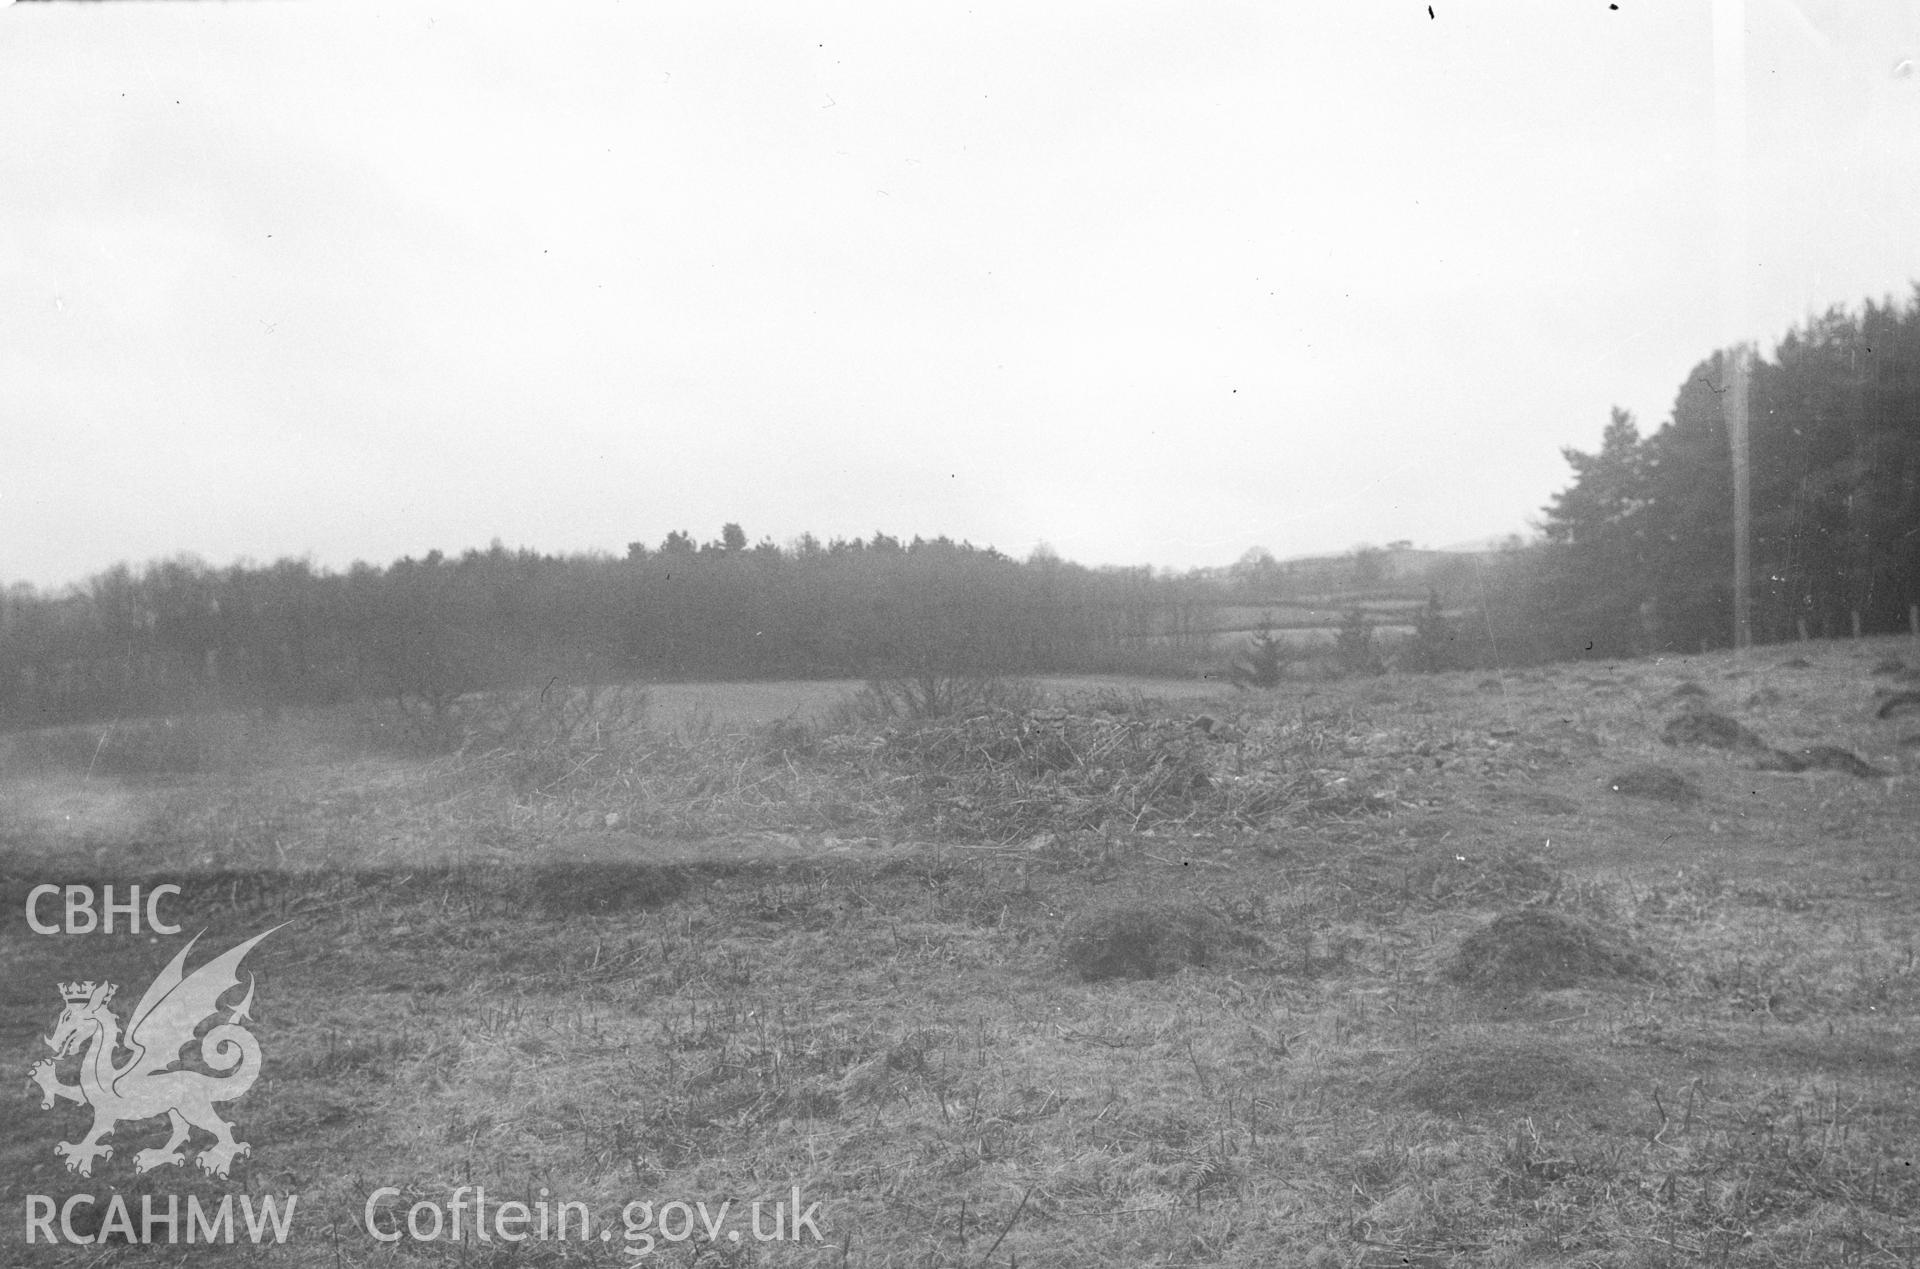 Digital copy of a nitrate negative showing Bryn Cosyn Round Barrows, Ysceifiog. From the Cadw Monuments in Care Collection.